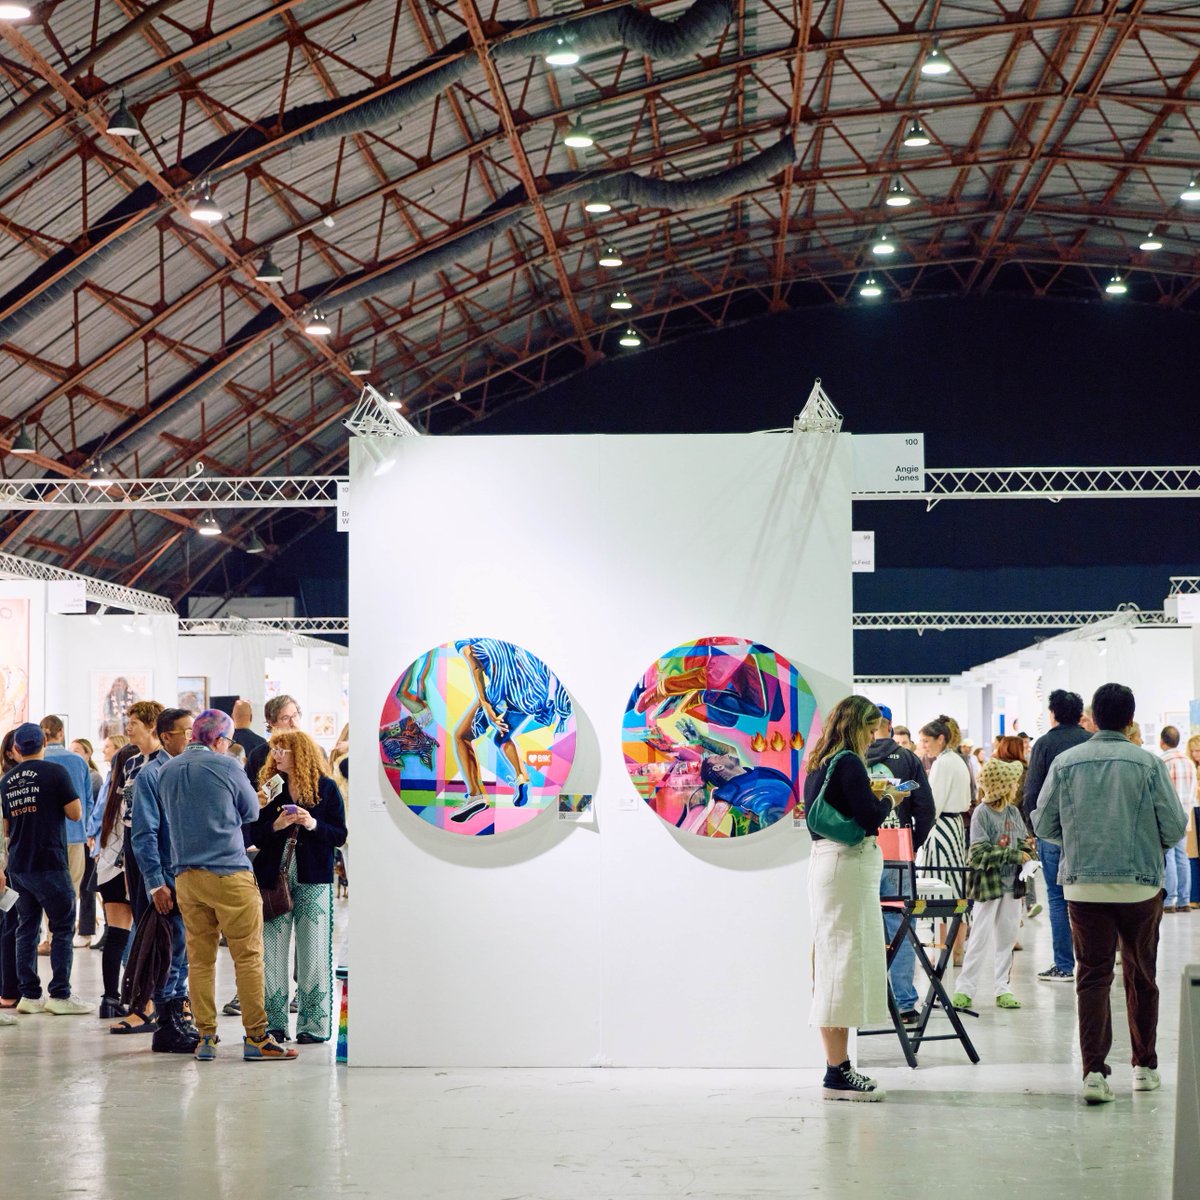 April is Arts, Culture, and Creativity Month, and Santa Monica is kicking things off with @TheOtherArtFair at The @BarkerHanger from 4/4 through 4/7!🎨 This event will feature 140 artists, immersive installations, DJs, and a full bar. bit.ly/3J1ZTQv #santamonica #artfair